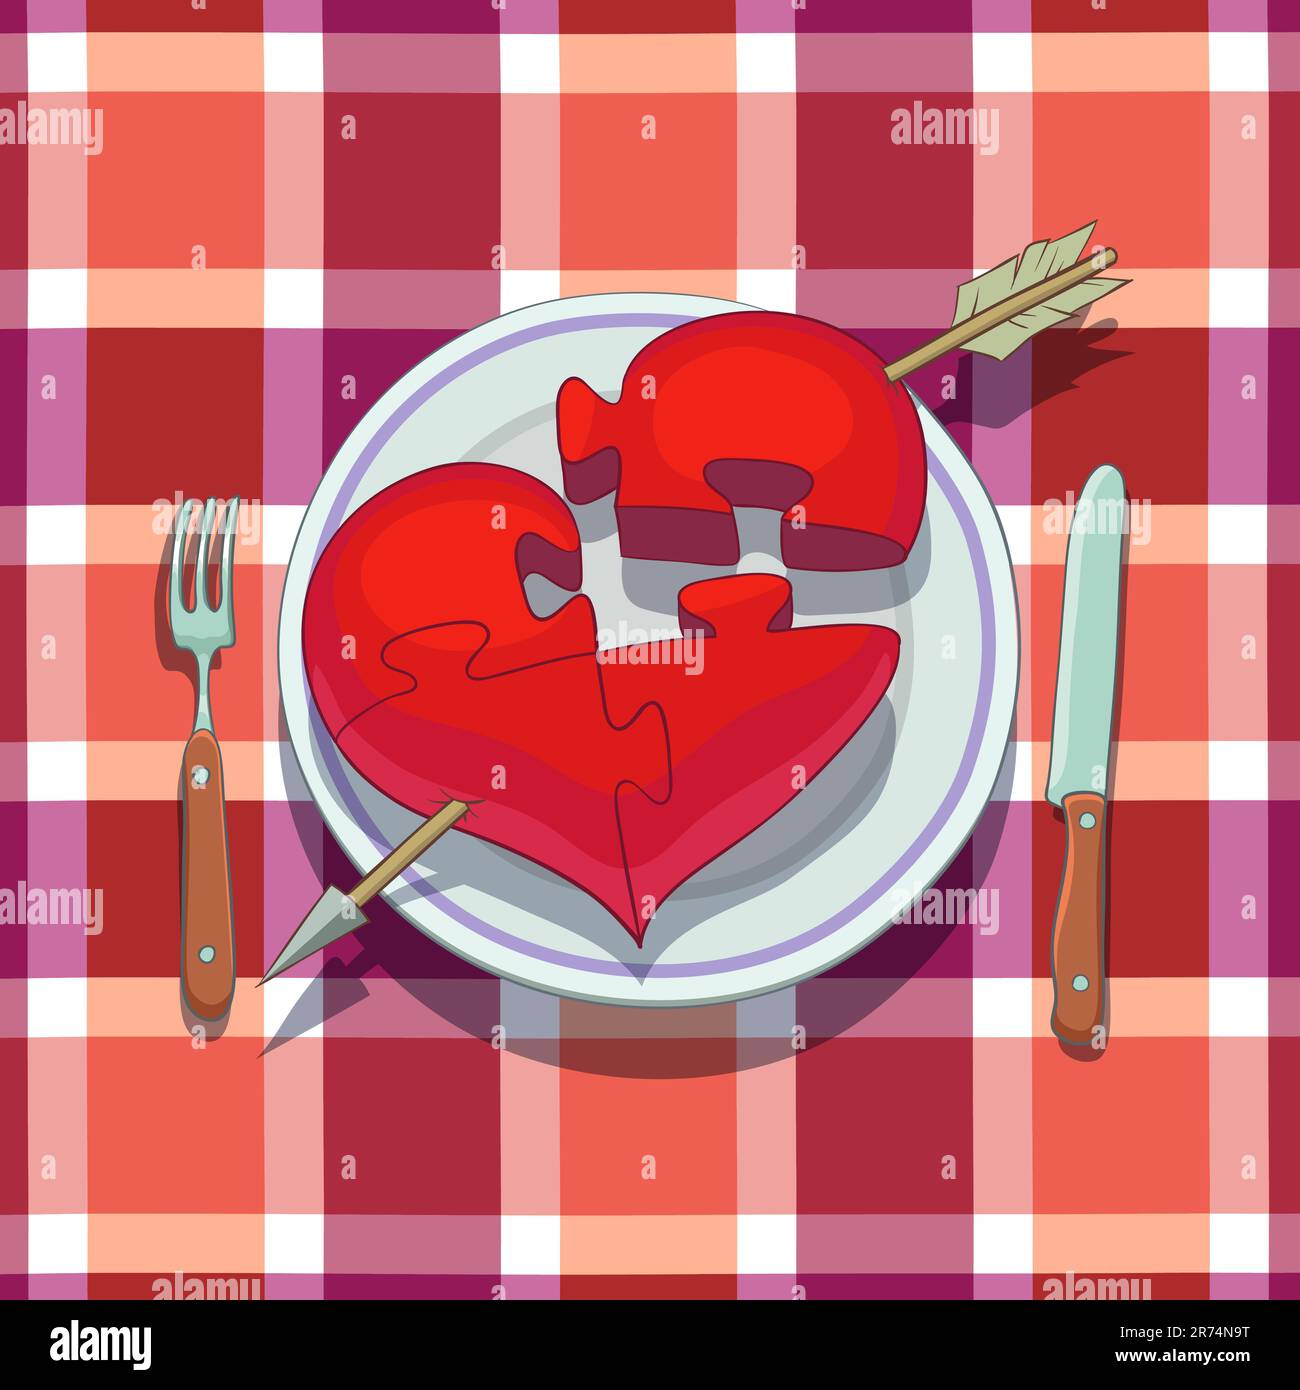 Valentine's Day Lunch: heart with arrow is placed on plate and is subdivided like a puzzle, a fork and a knife are near the plate. Stock Vector